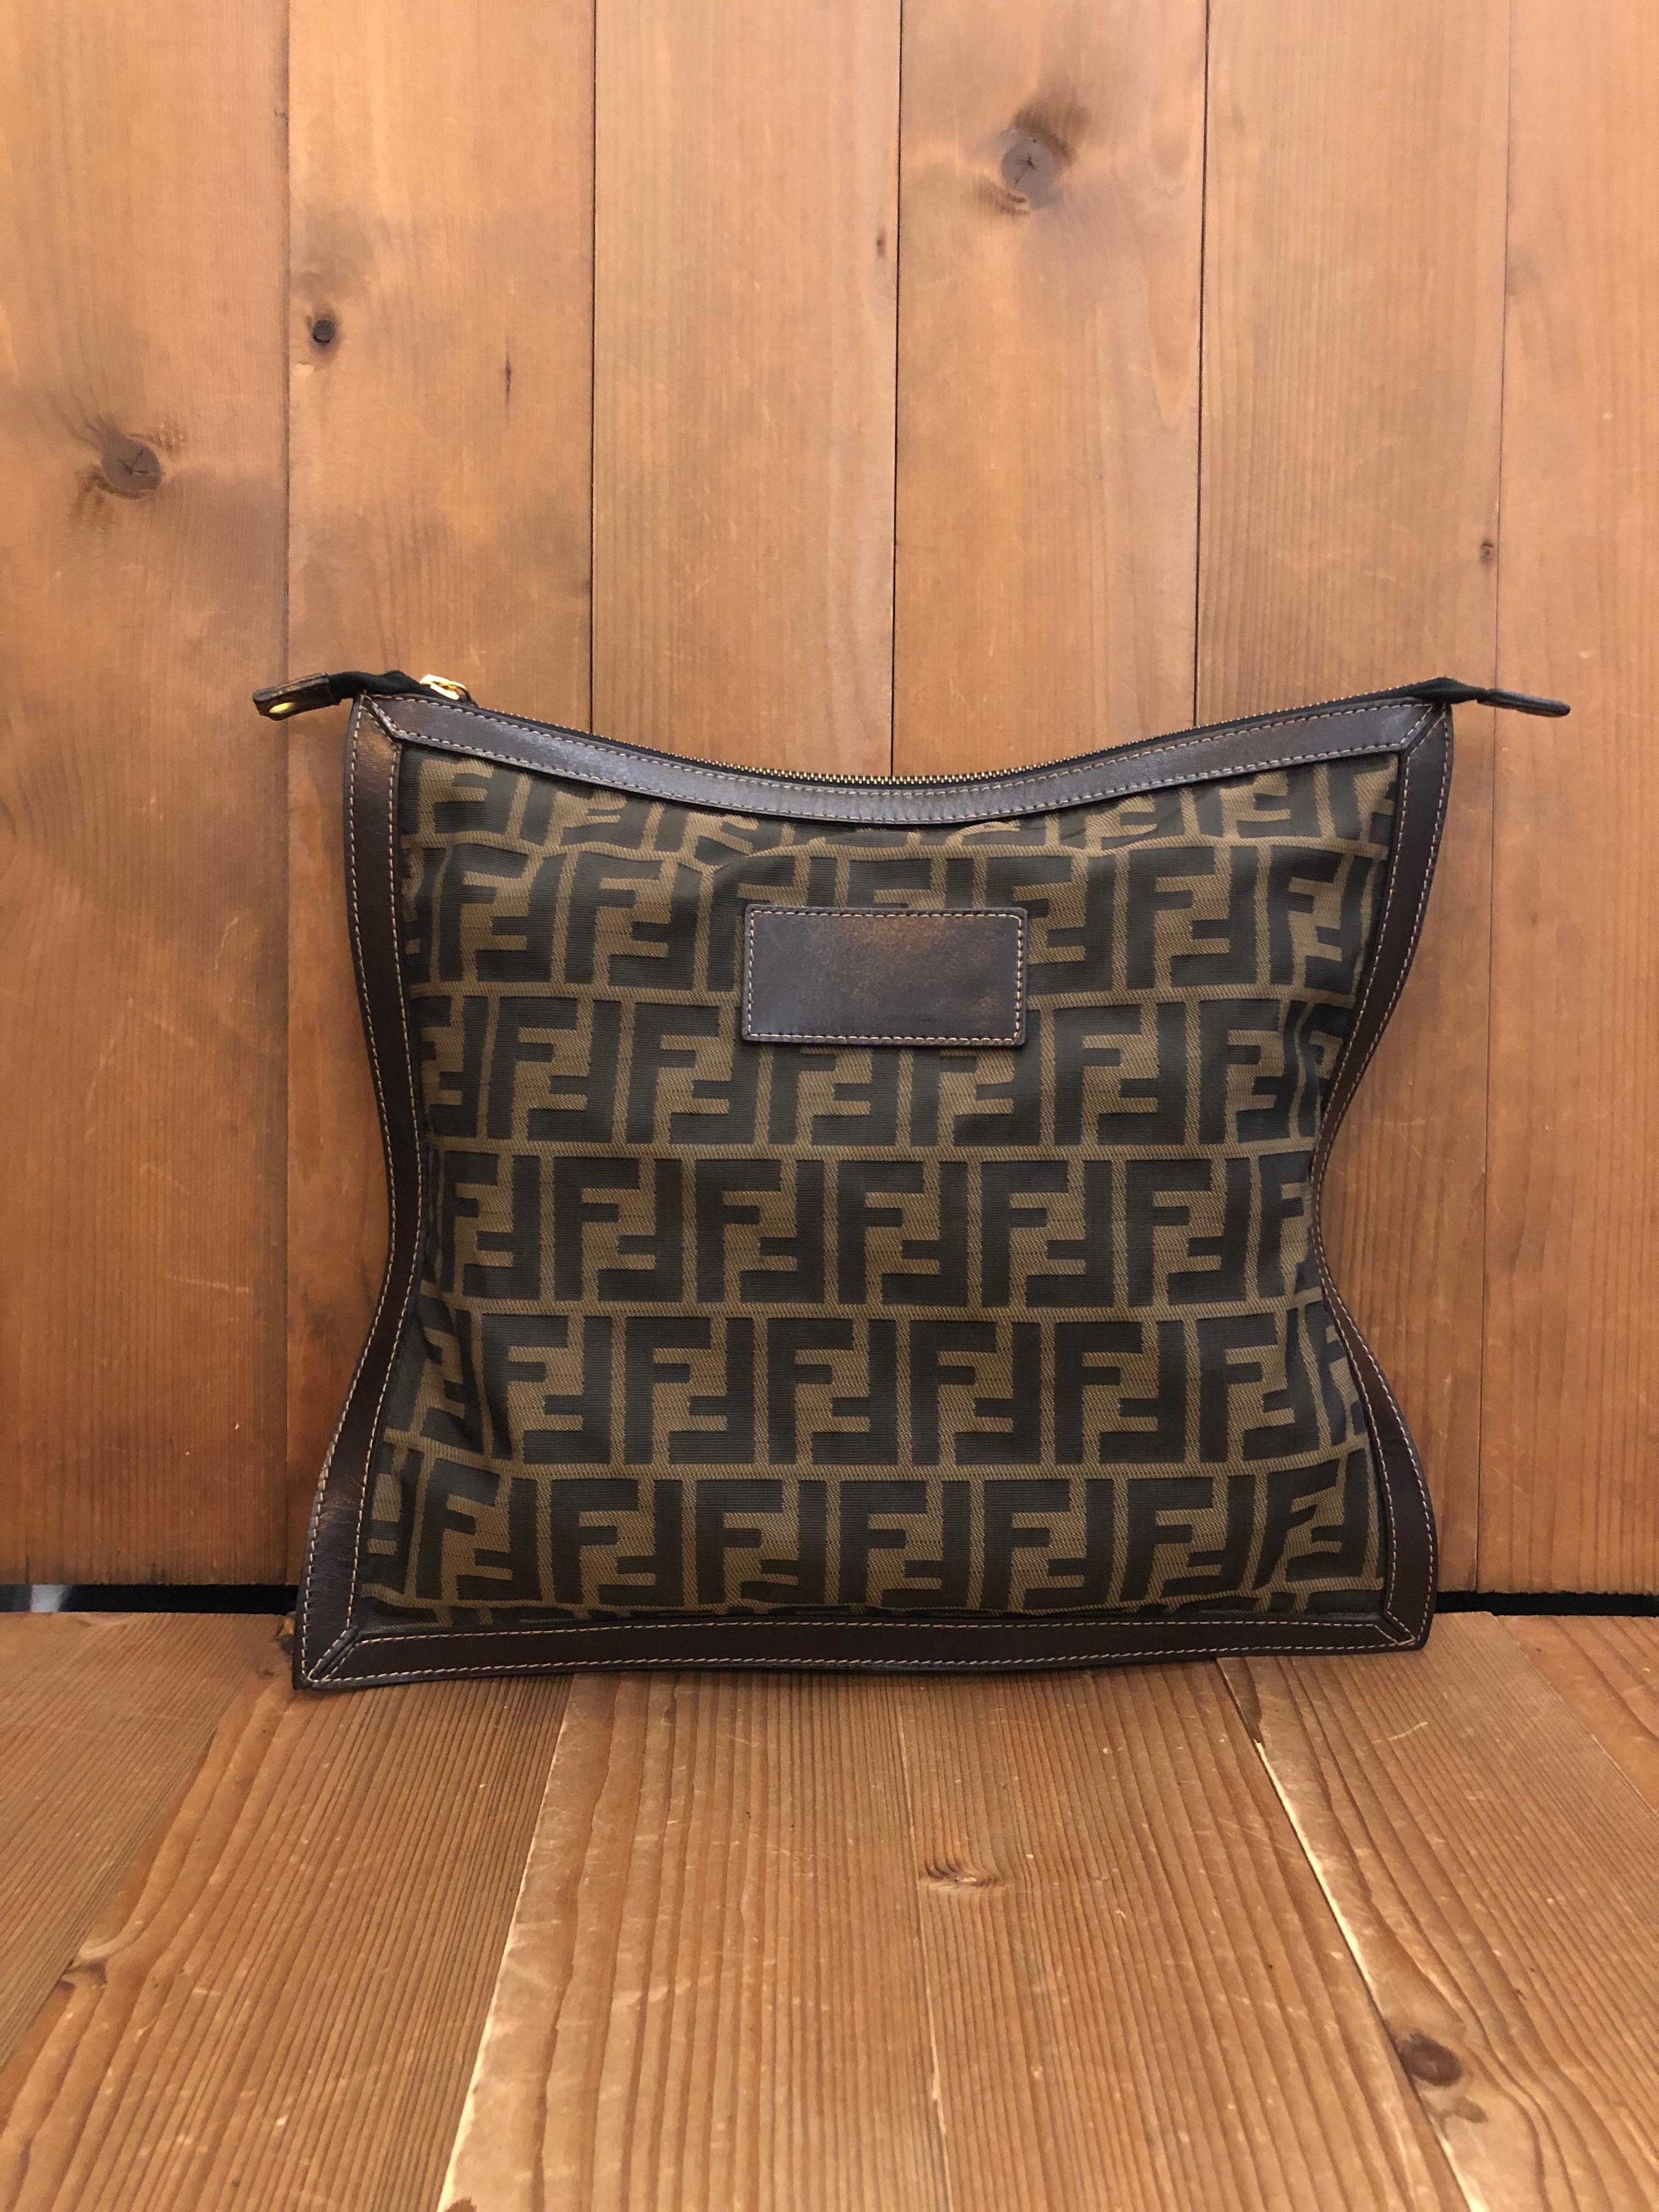 This vintage FENDI flat pouch is crafted of Fendi's iconic Zucca jacquard in brown trimmed with brown smooth leather. Top zipper closure opens to an un-lined interior. Third party eyelets and rope strap are added. Measures approximately 11.5 x 13